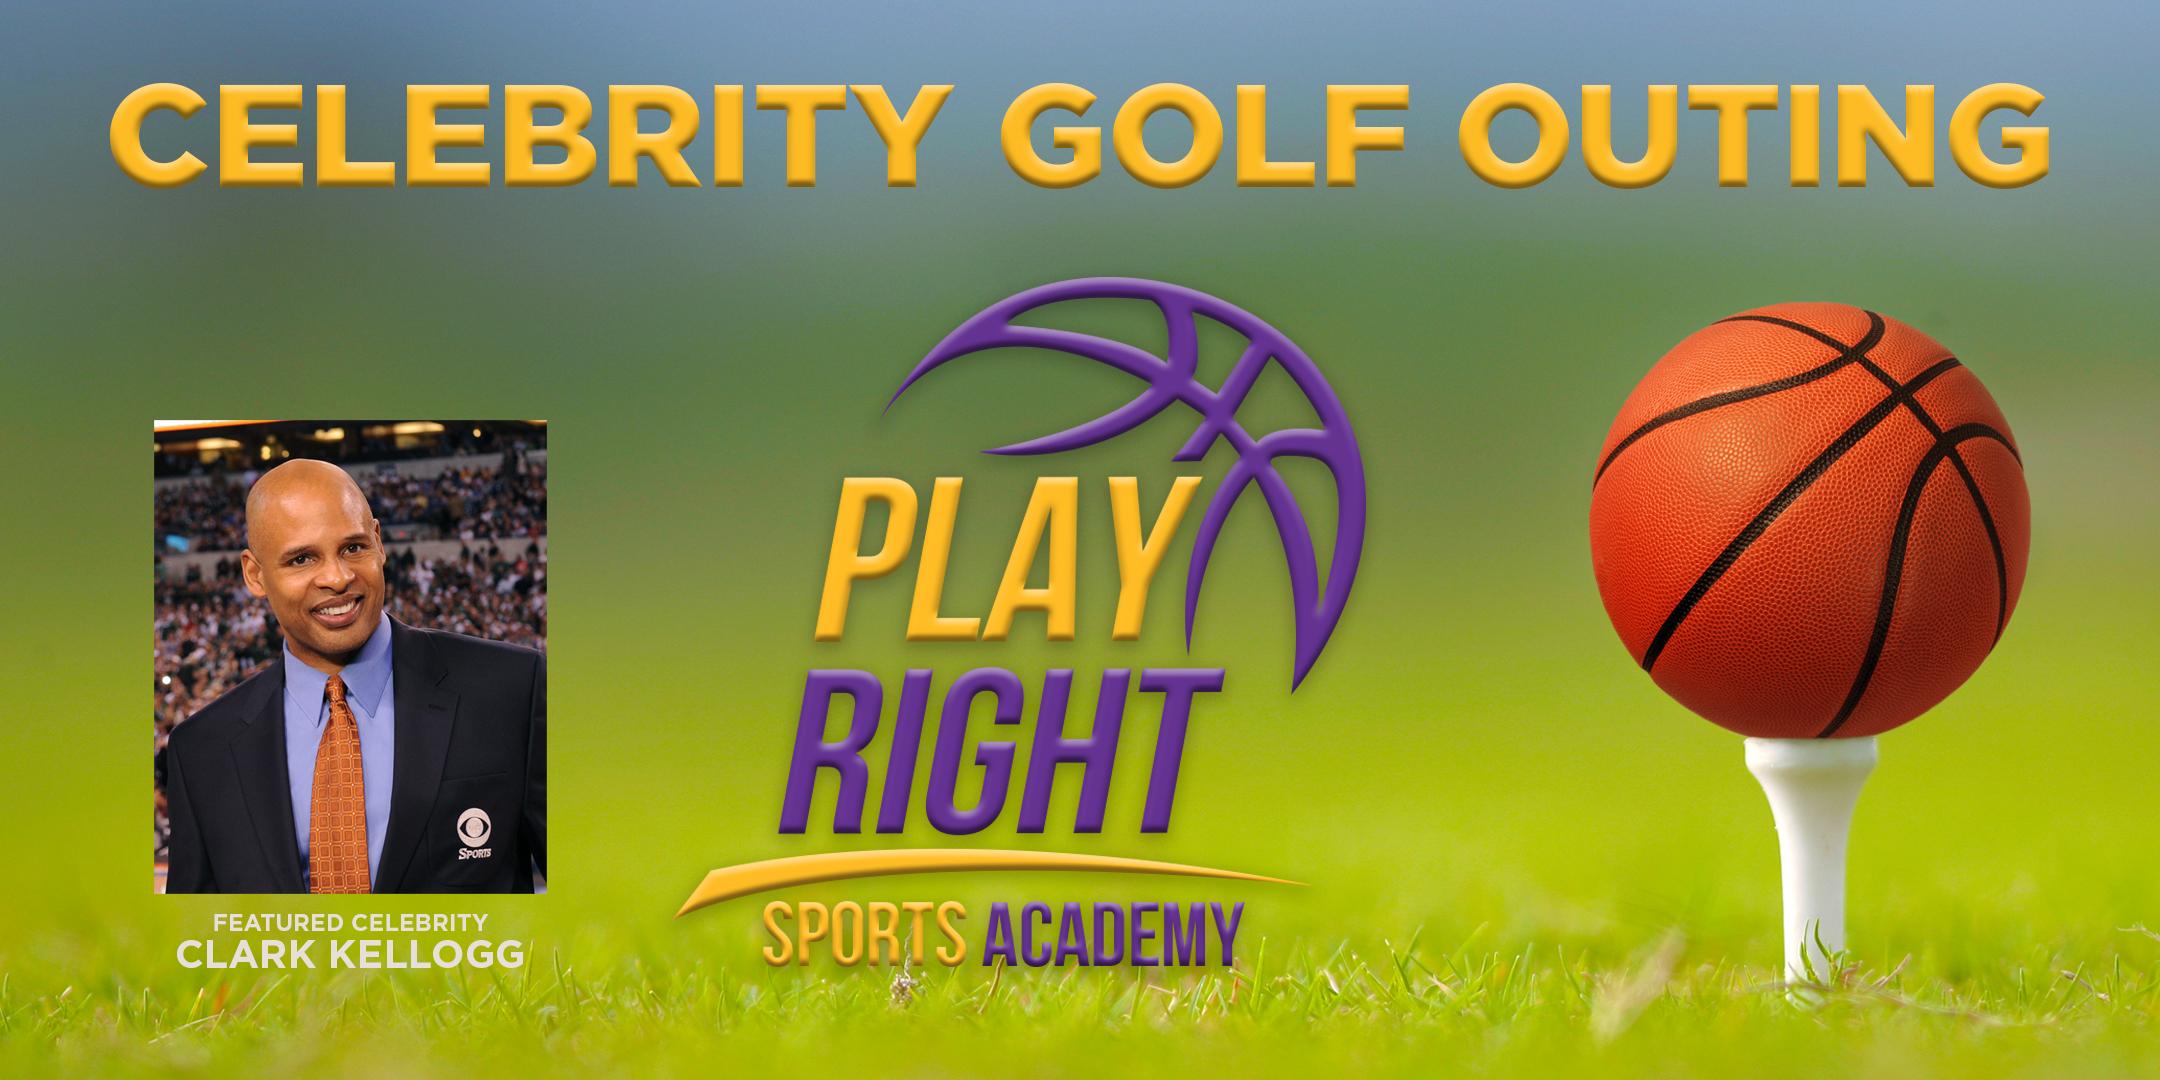 2021 Play Right Sports Academy Celebrity Golf Outing